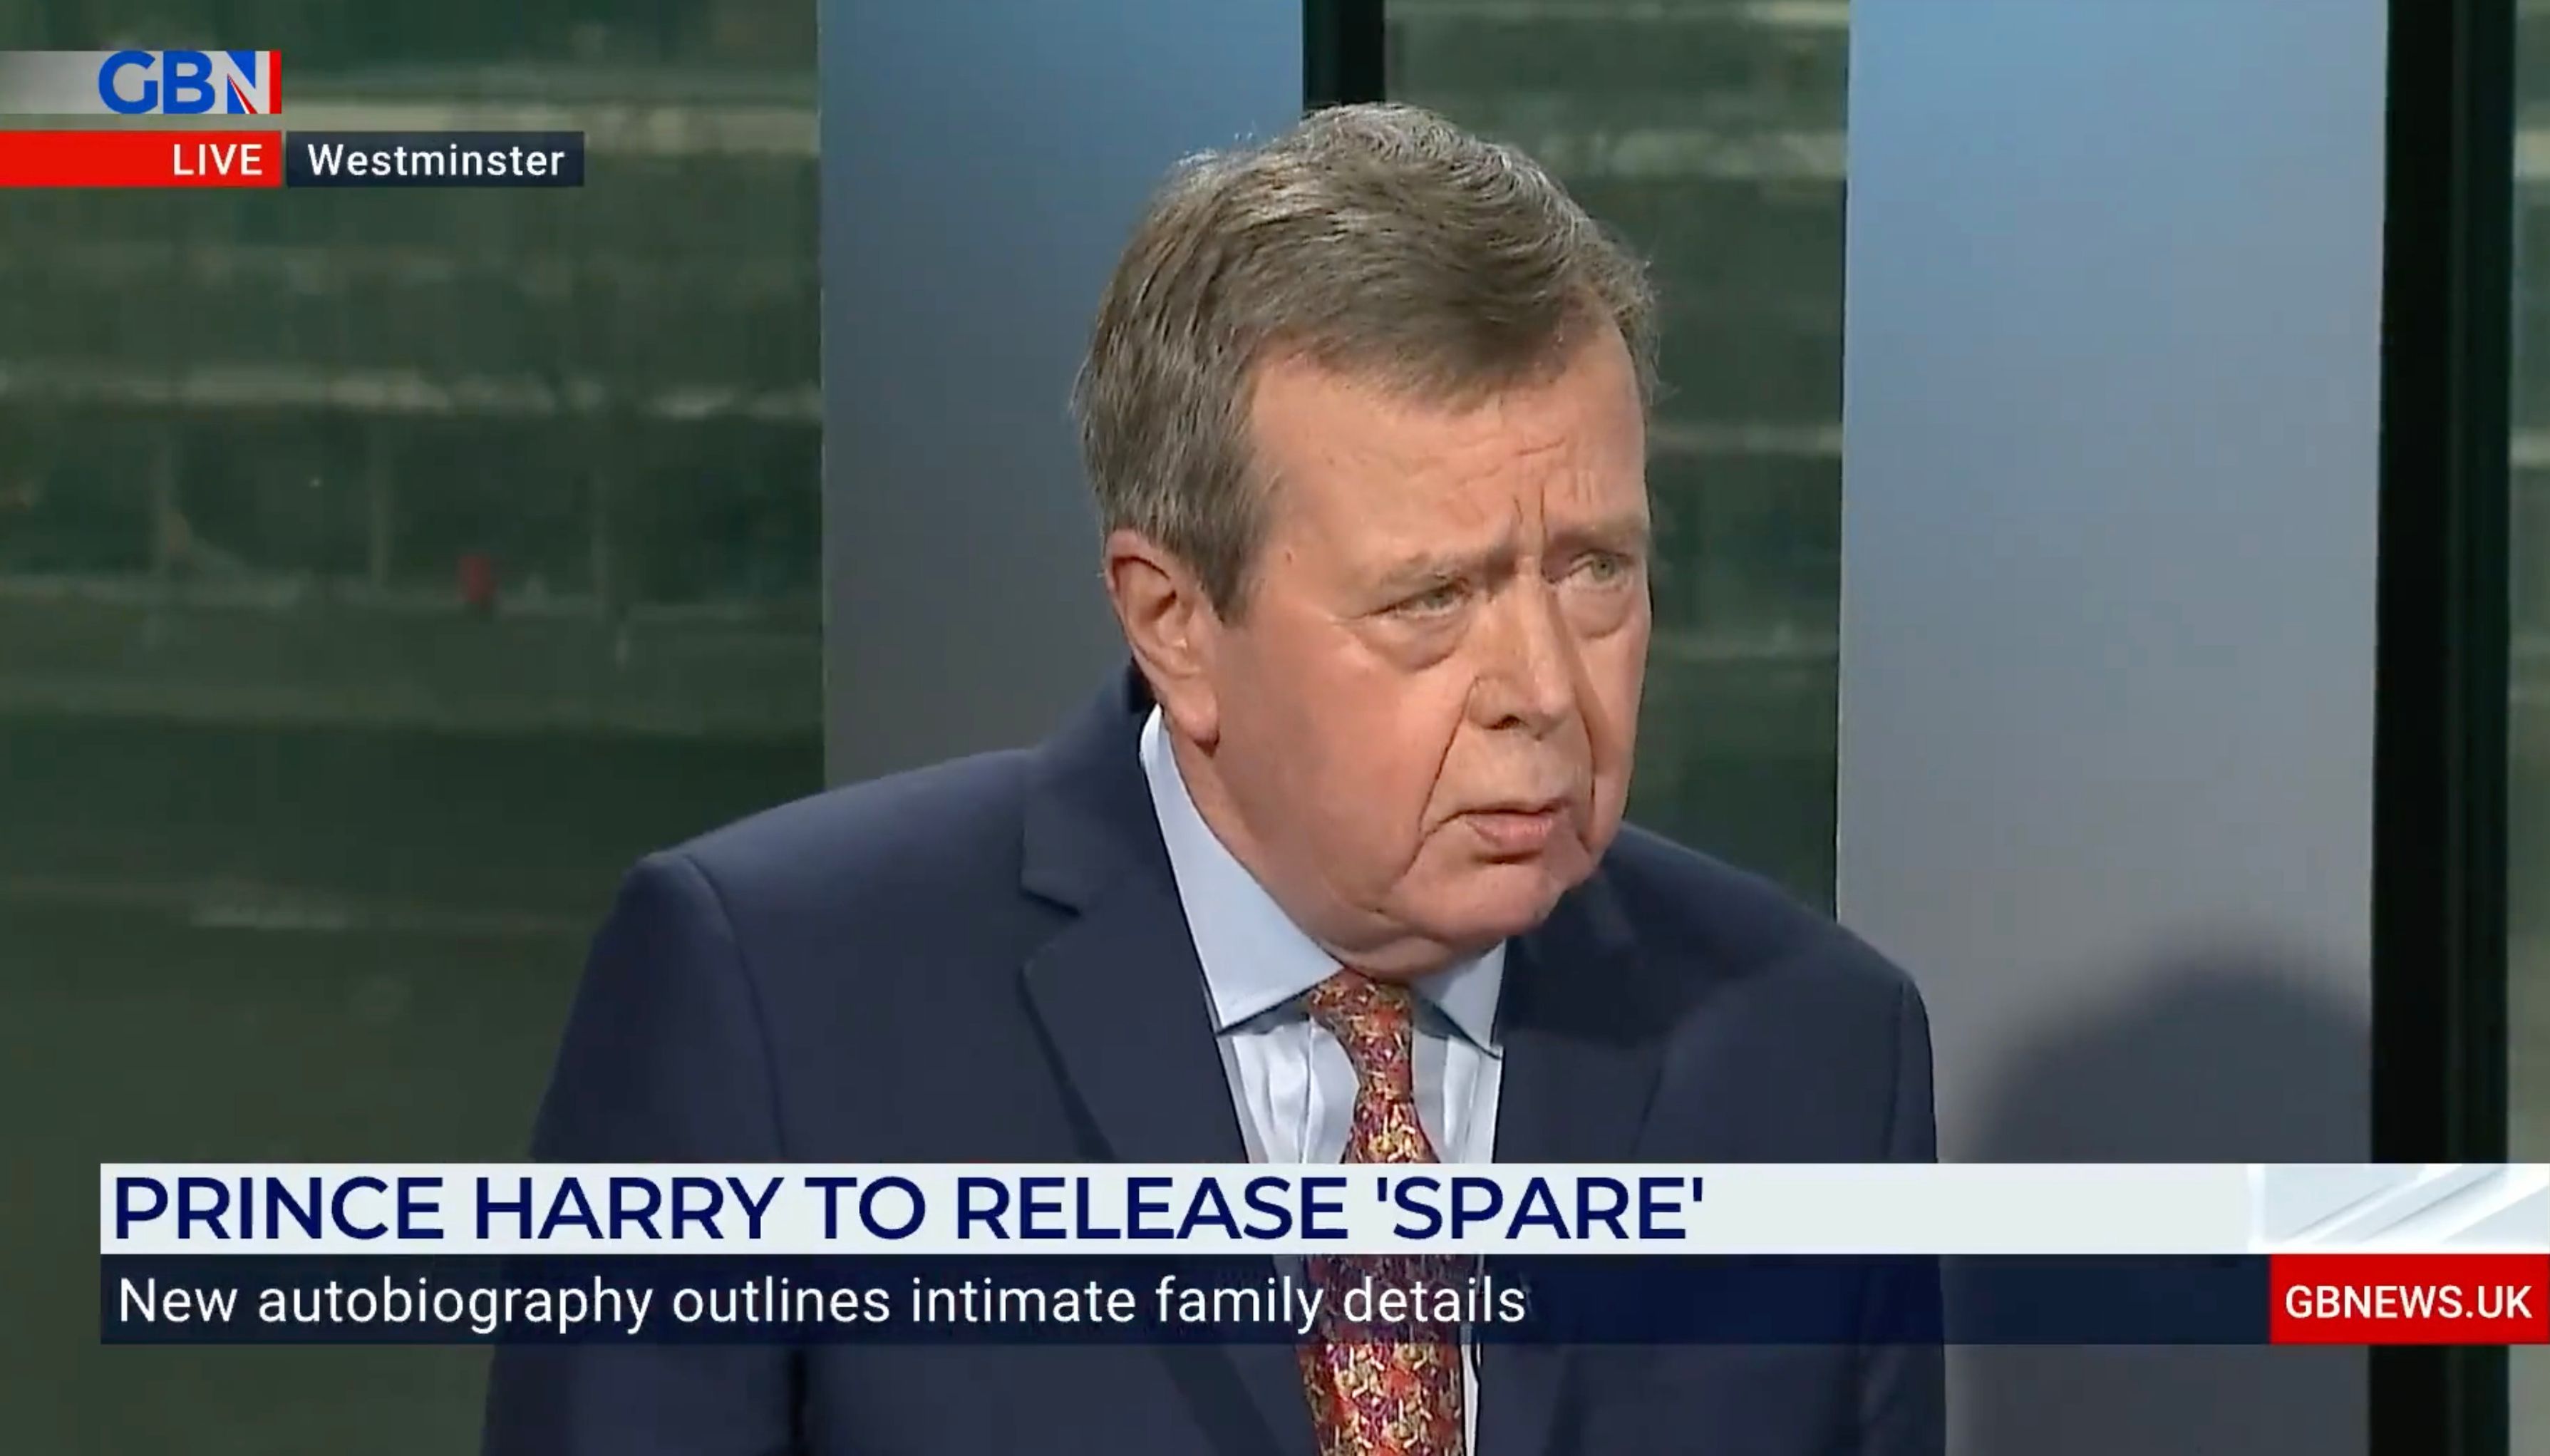 Ken Wharfe, Princess Diana's former bodyguard has hit out at Prince Harry's Taliban claims